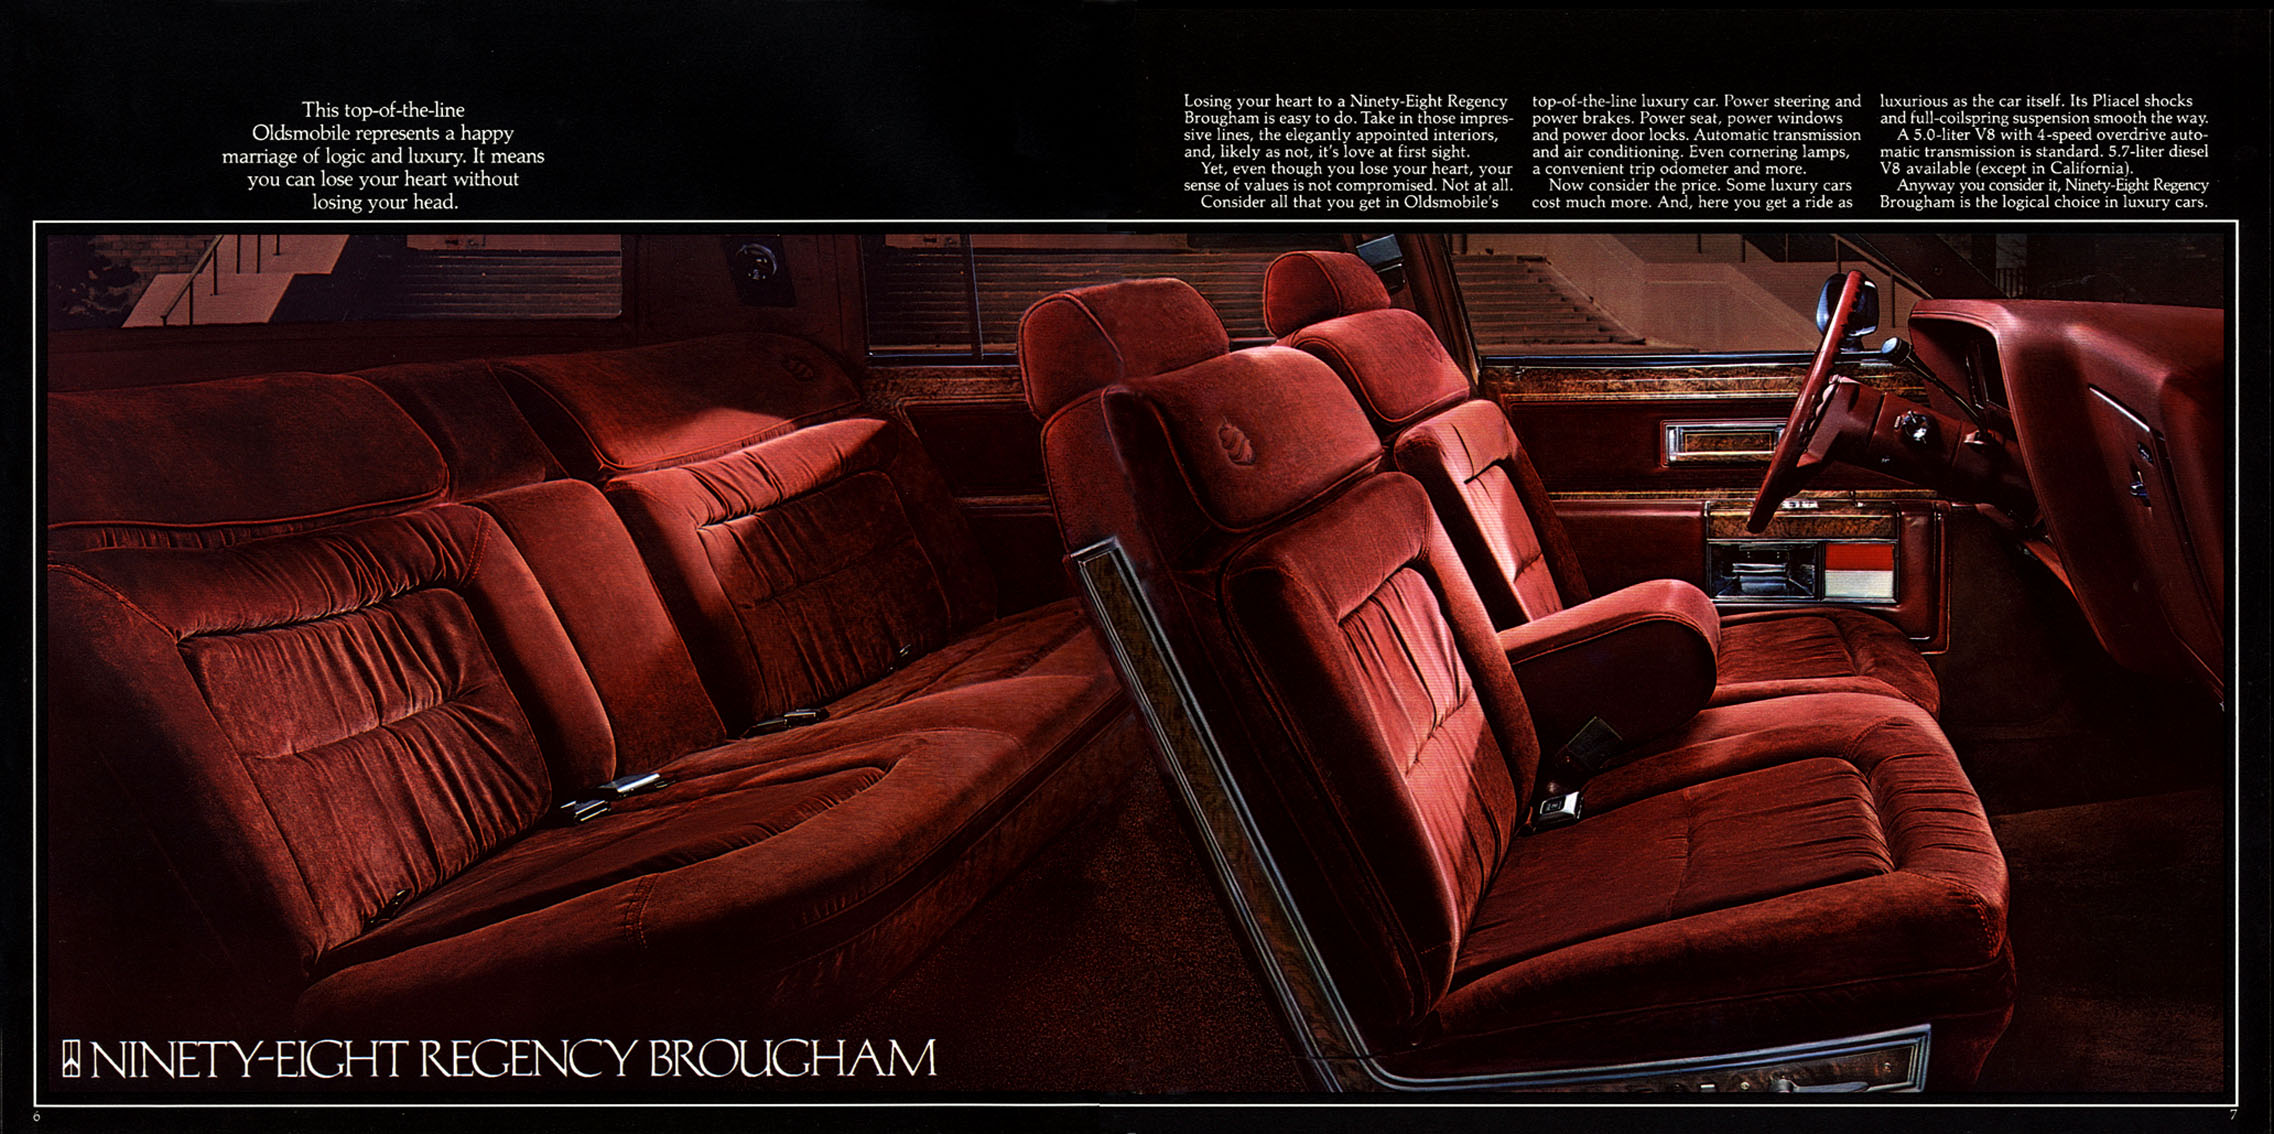 1984 Oldsmobile Full-Size Brochure Page 19